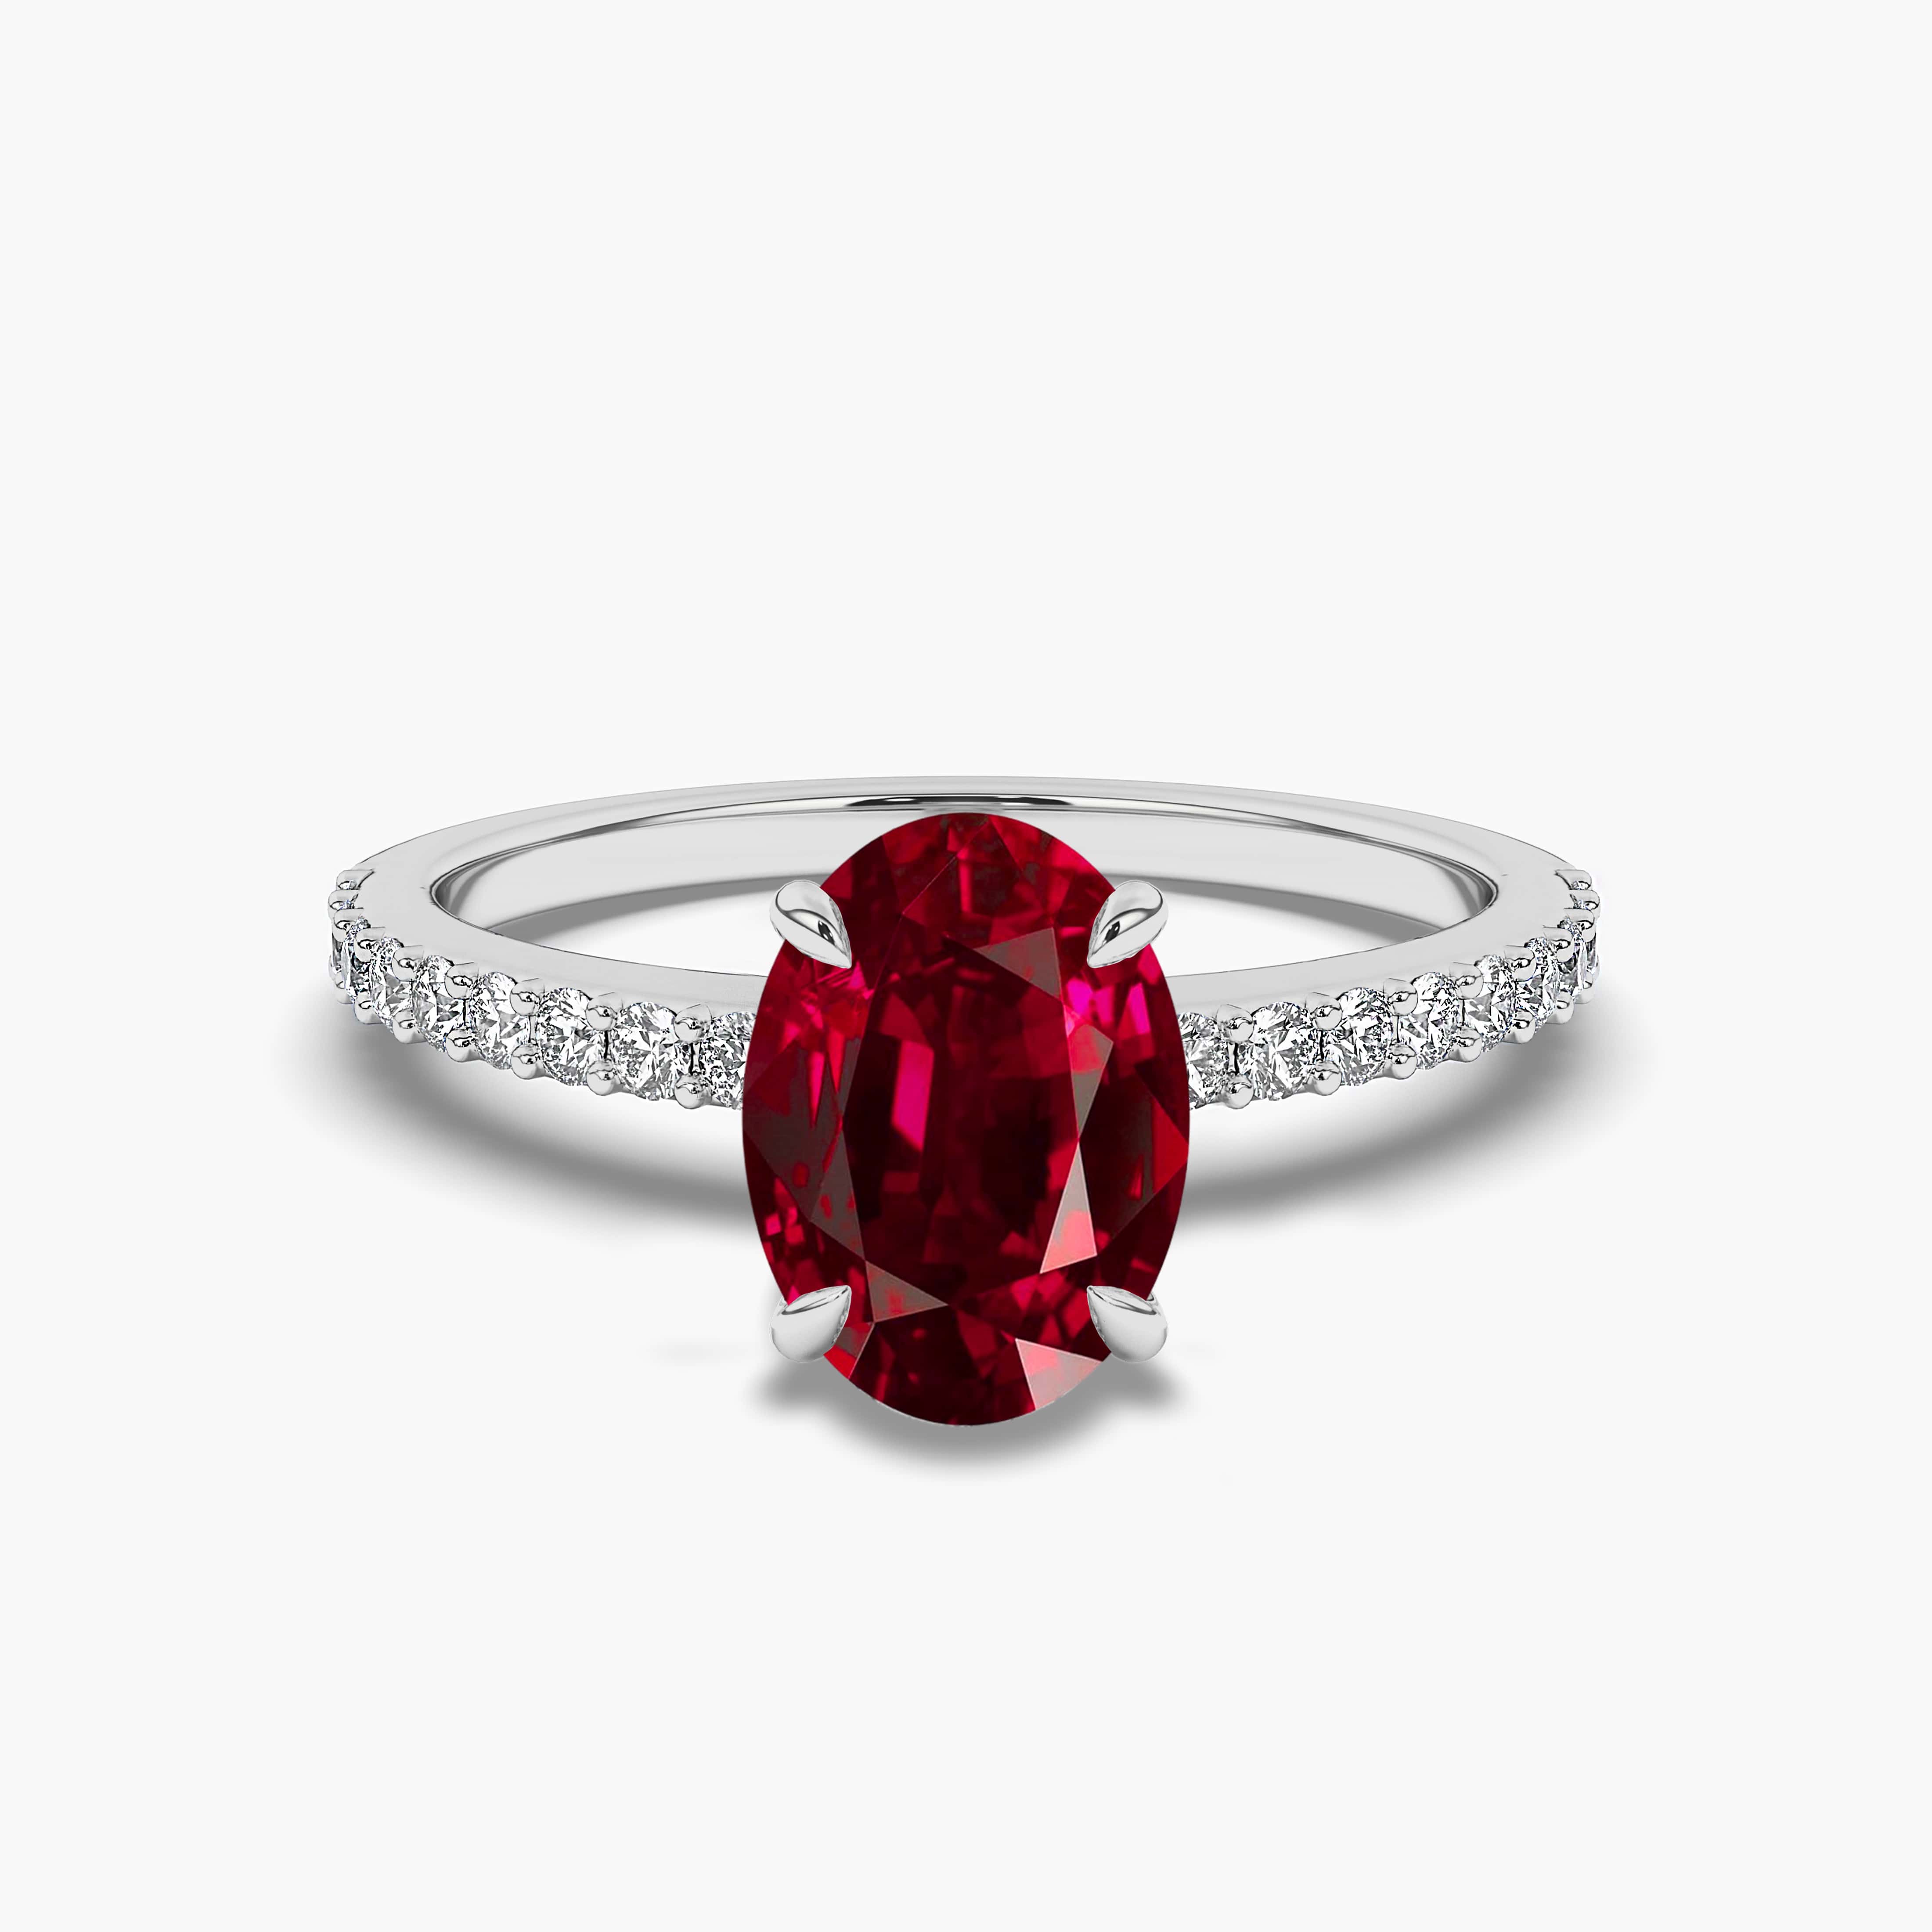 WHITE GOLD OVAL RUBY AND DIAMONDS ENGAGEMENT RING FOR WOMAN'S